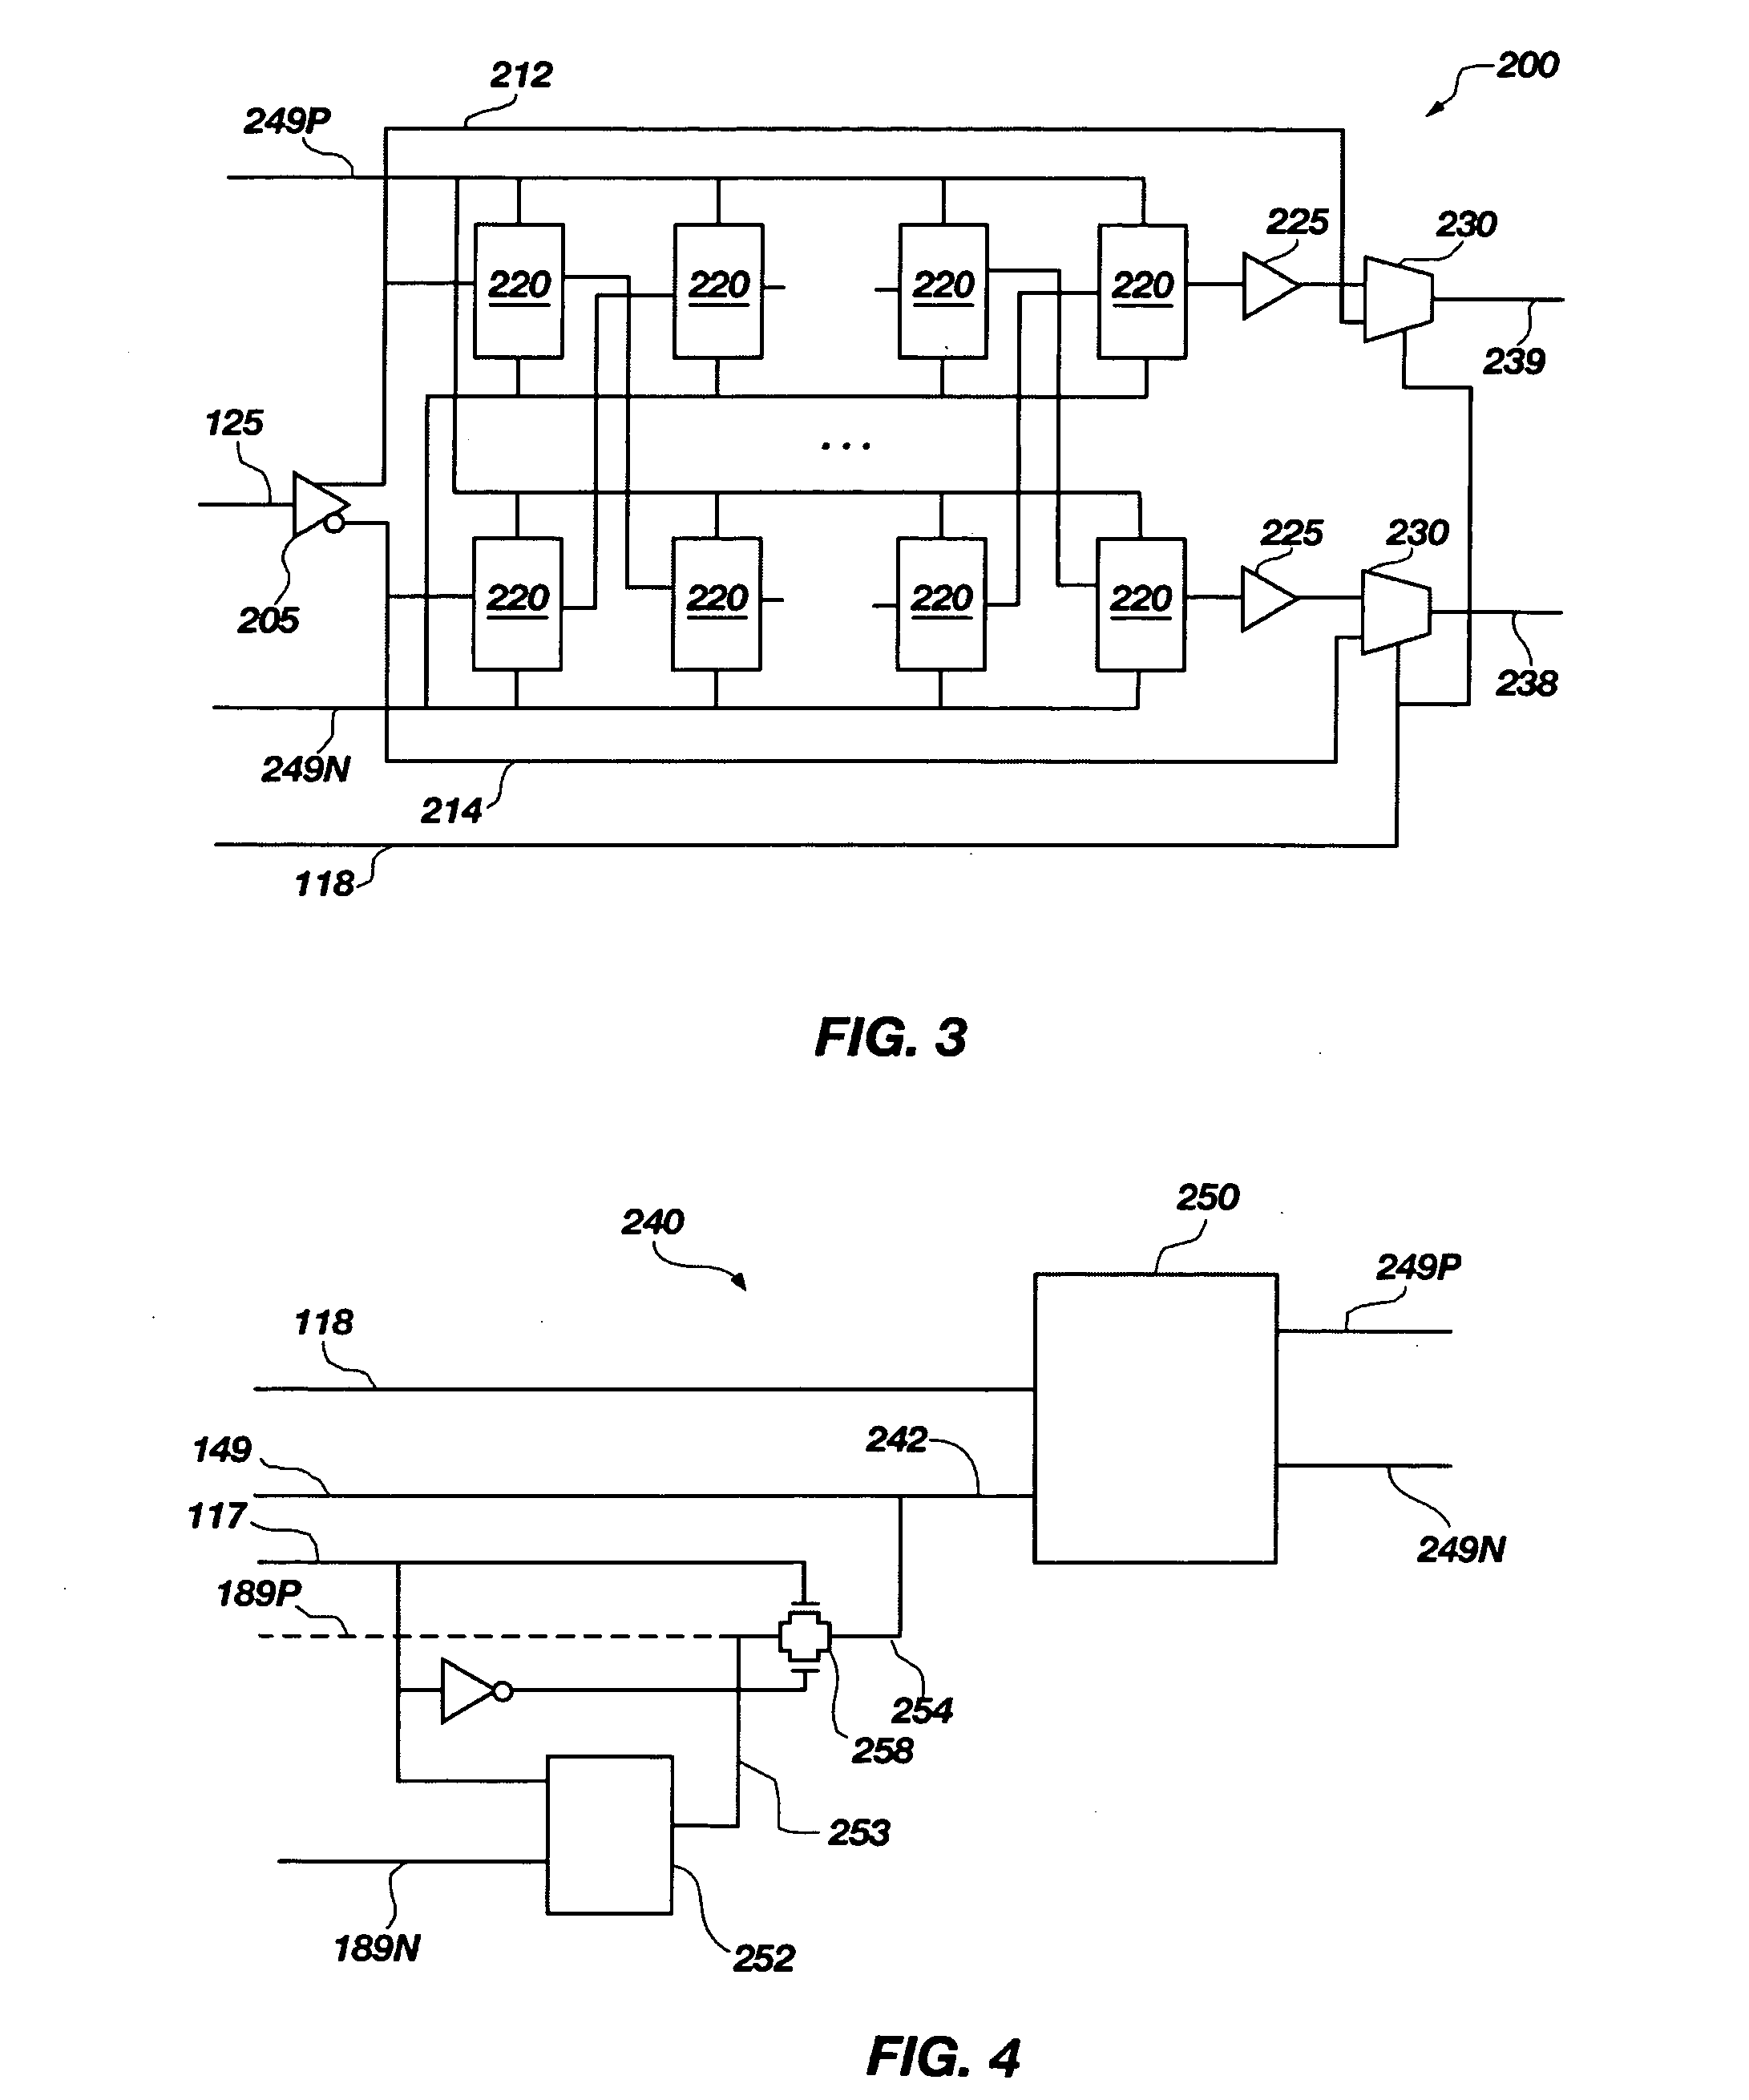 Method and apparatus to set a tuning range for an analog delay